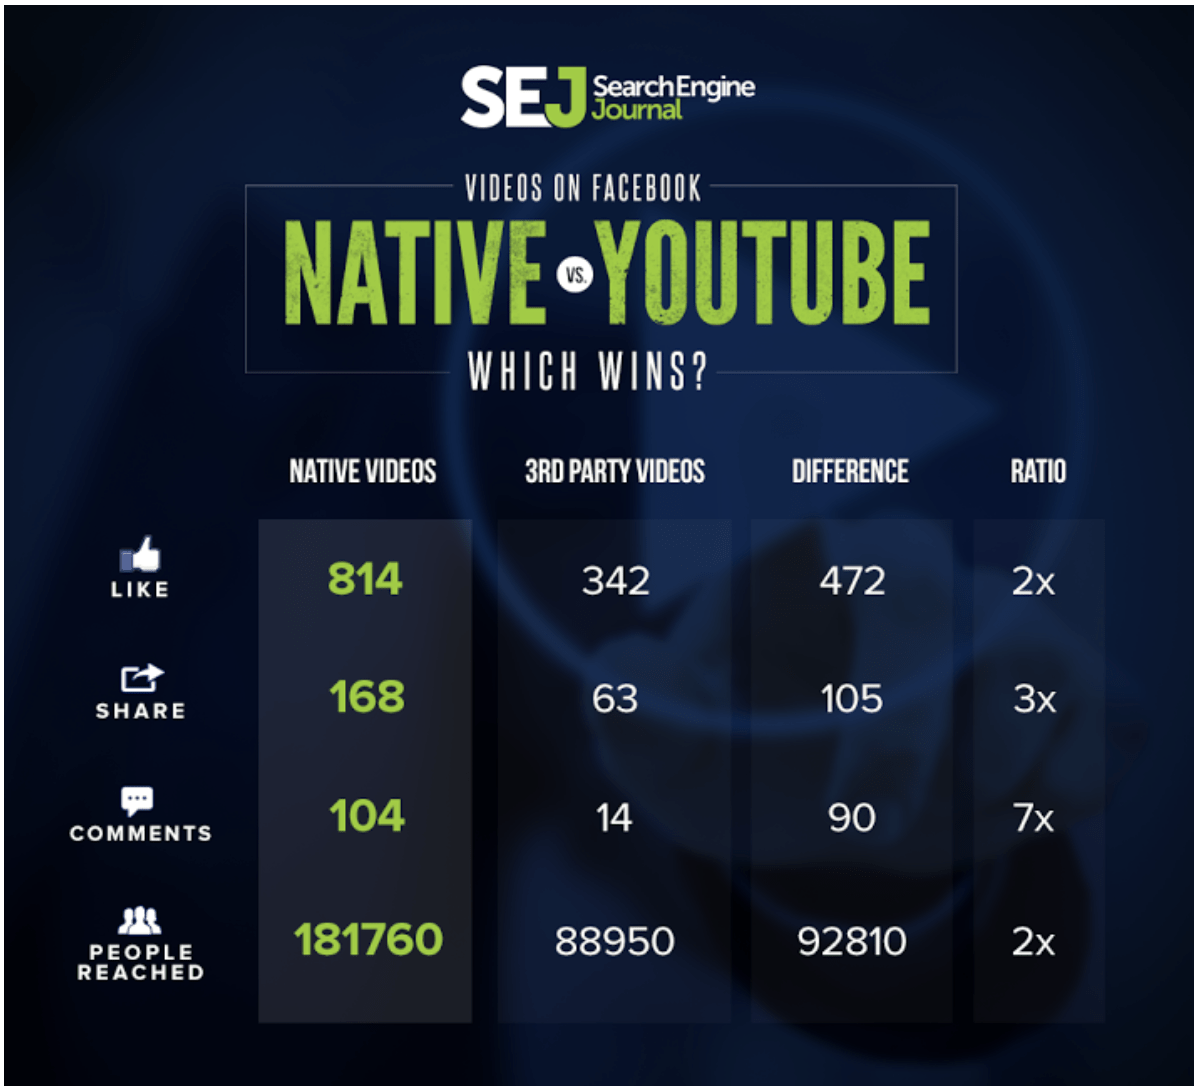 An infographic from Search Engine Journal comparing native video performance on Facebook versus YouTube videos.